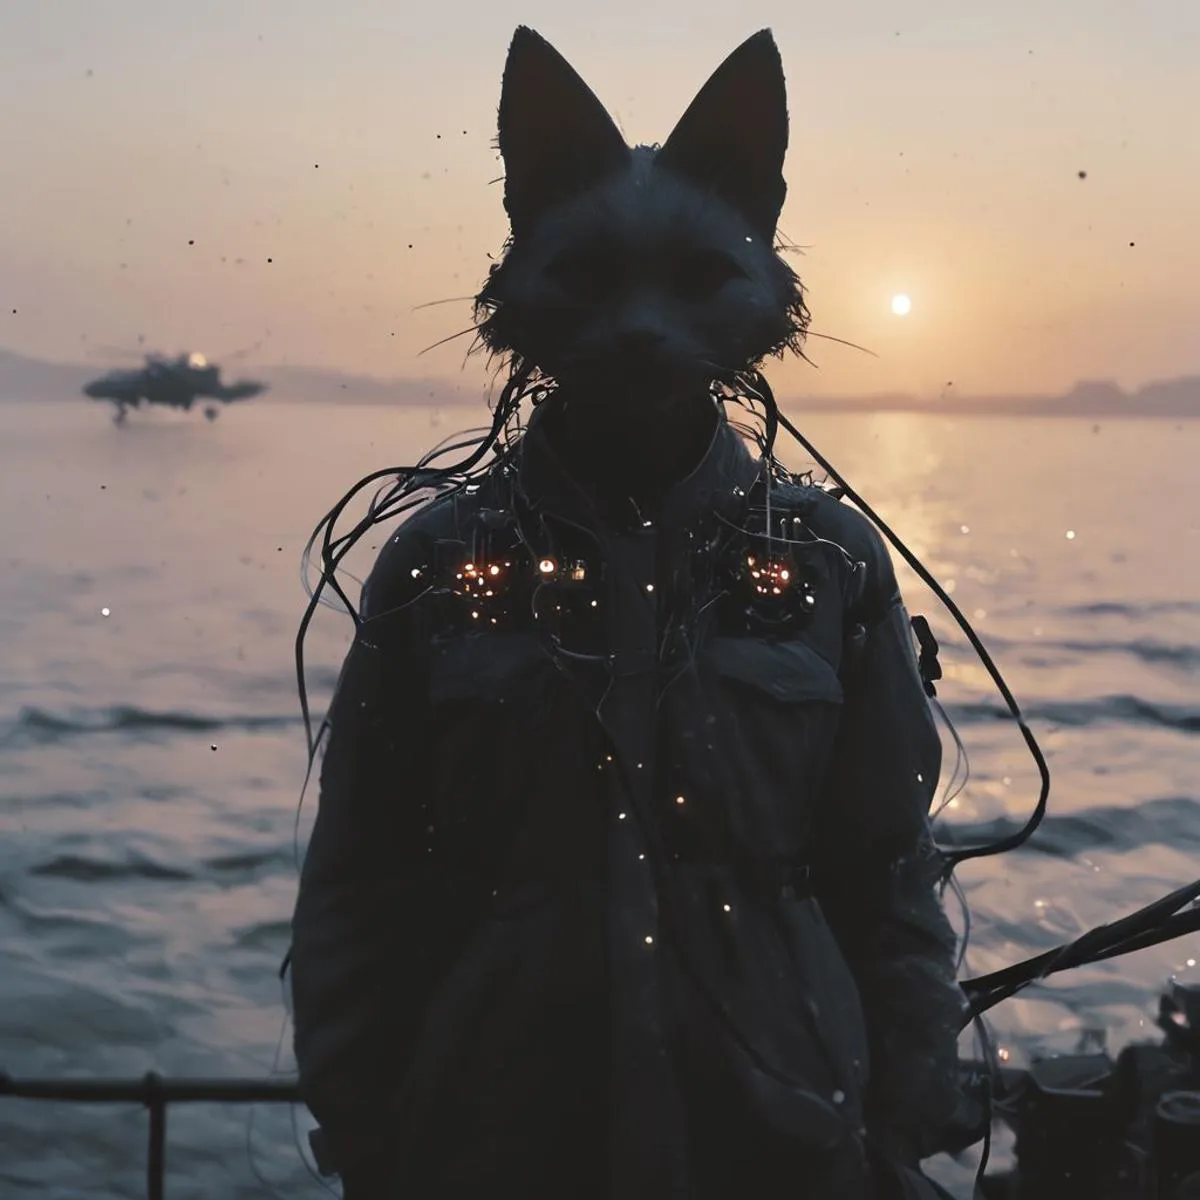 AI generated image of a cyberpunk fox silhouette at sunset near water with illuminated wires